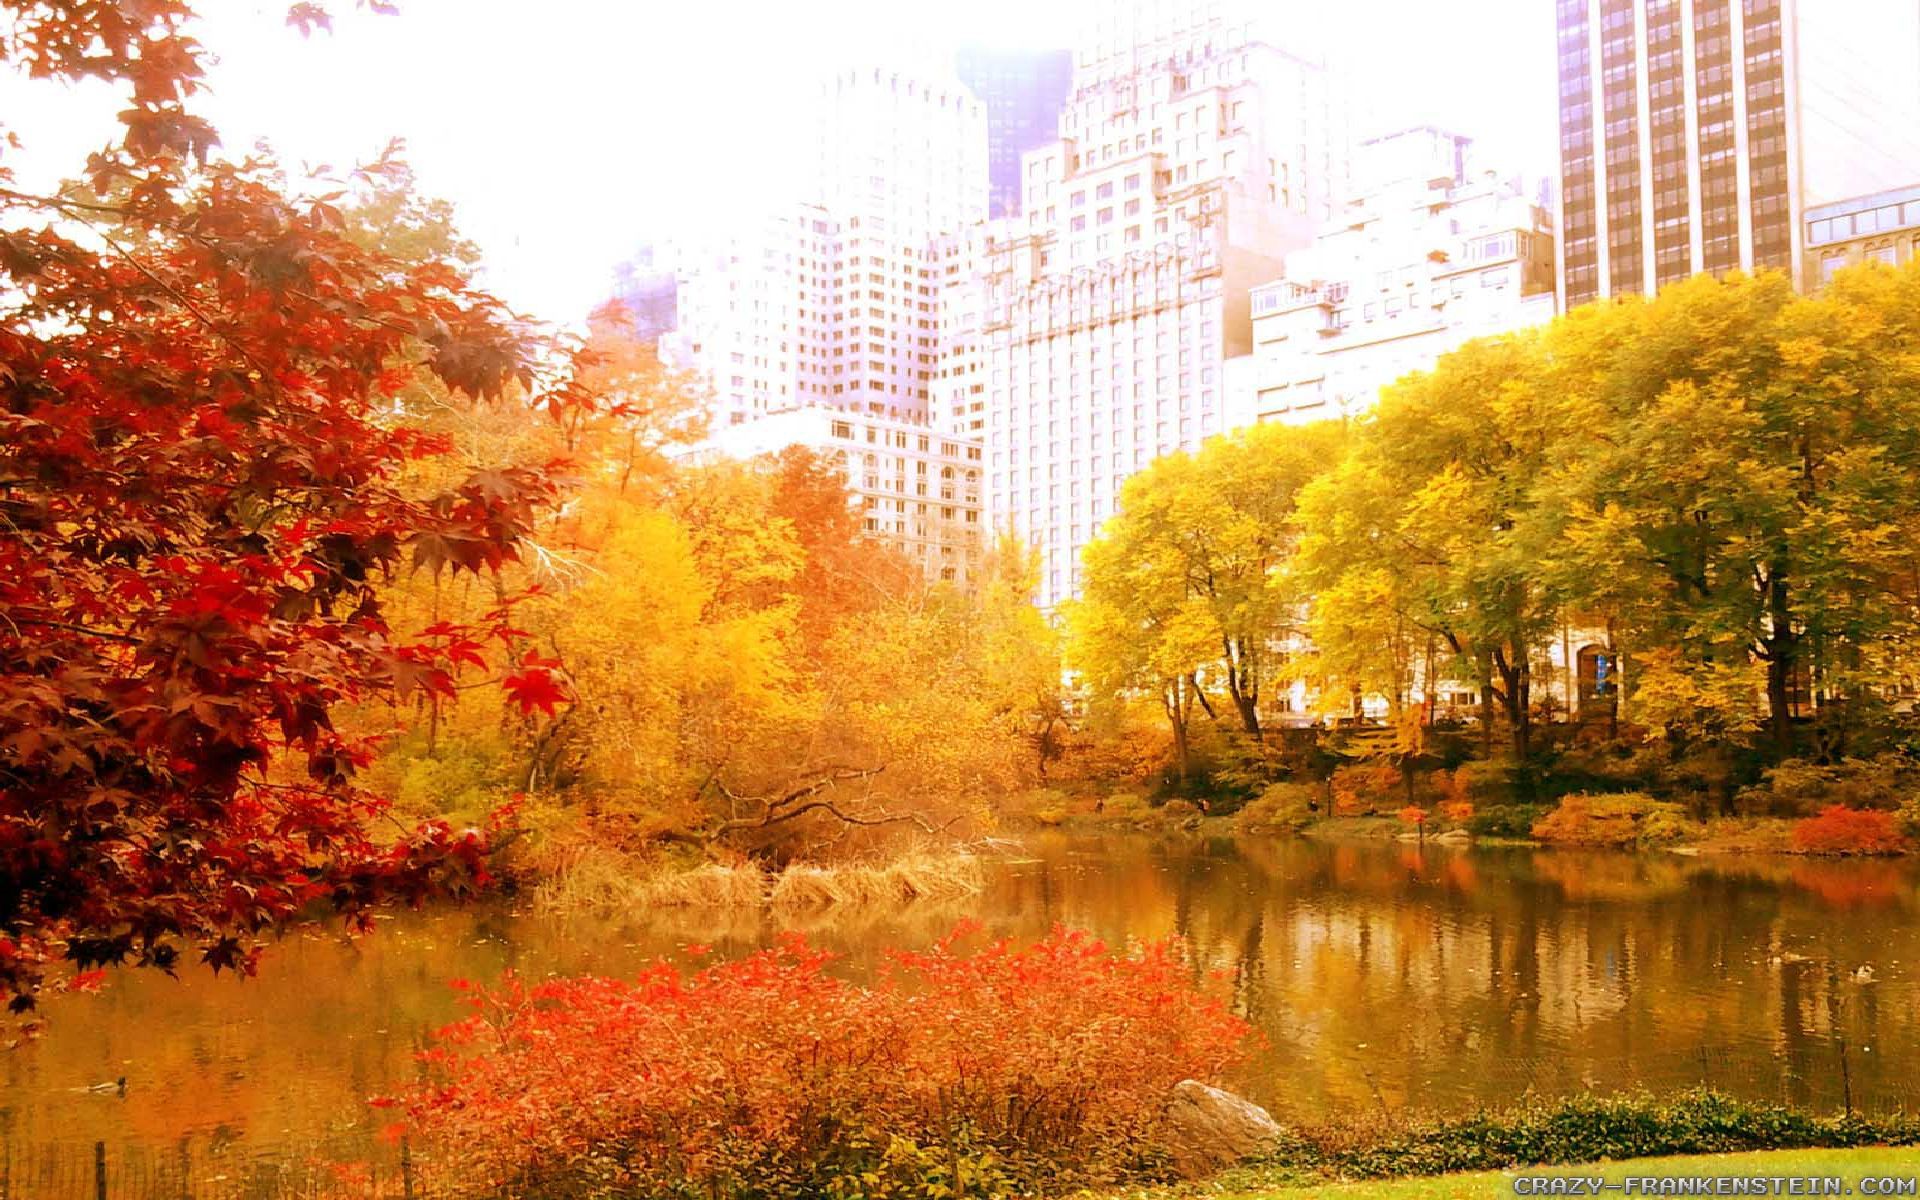 Free download new york city autumn in new york wallpaper 1920x1200jpg [1920x1200] for your Desktop, Mobile & Tablet. Explore Autumn in NYC Wallpaper. HD Spring Wallpaper For Desktop, Beautiful